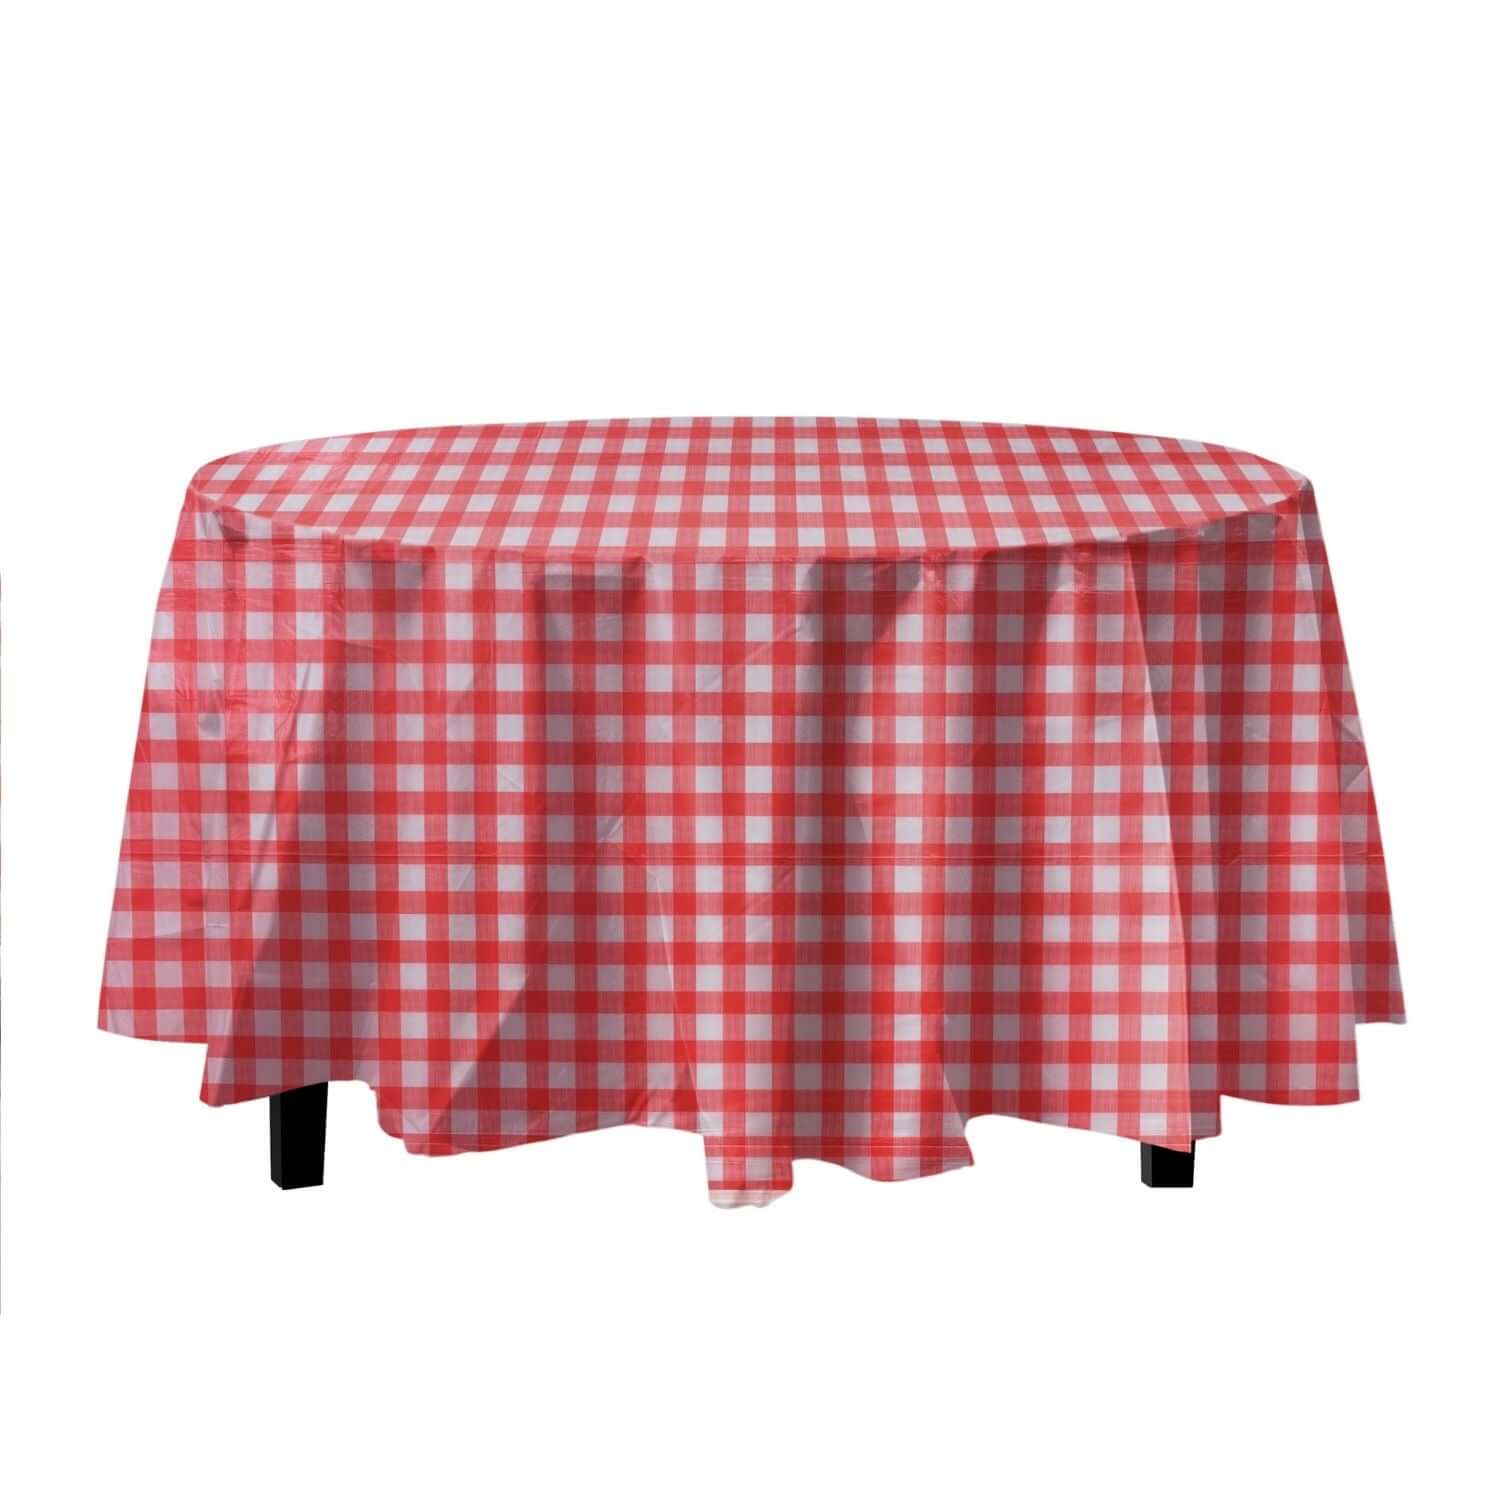 Red Gingham Printed Plastic Round Table Cloth | 48 Count